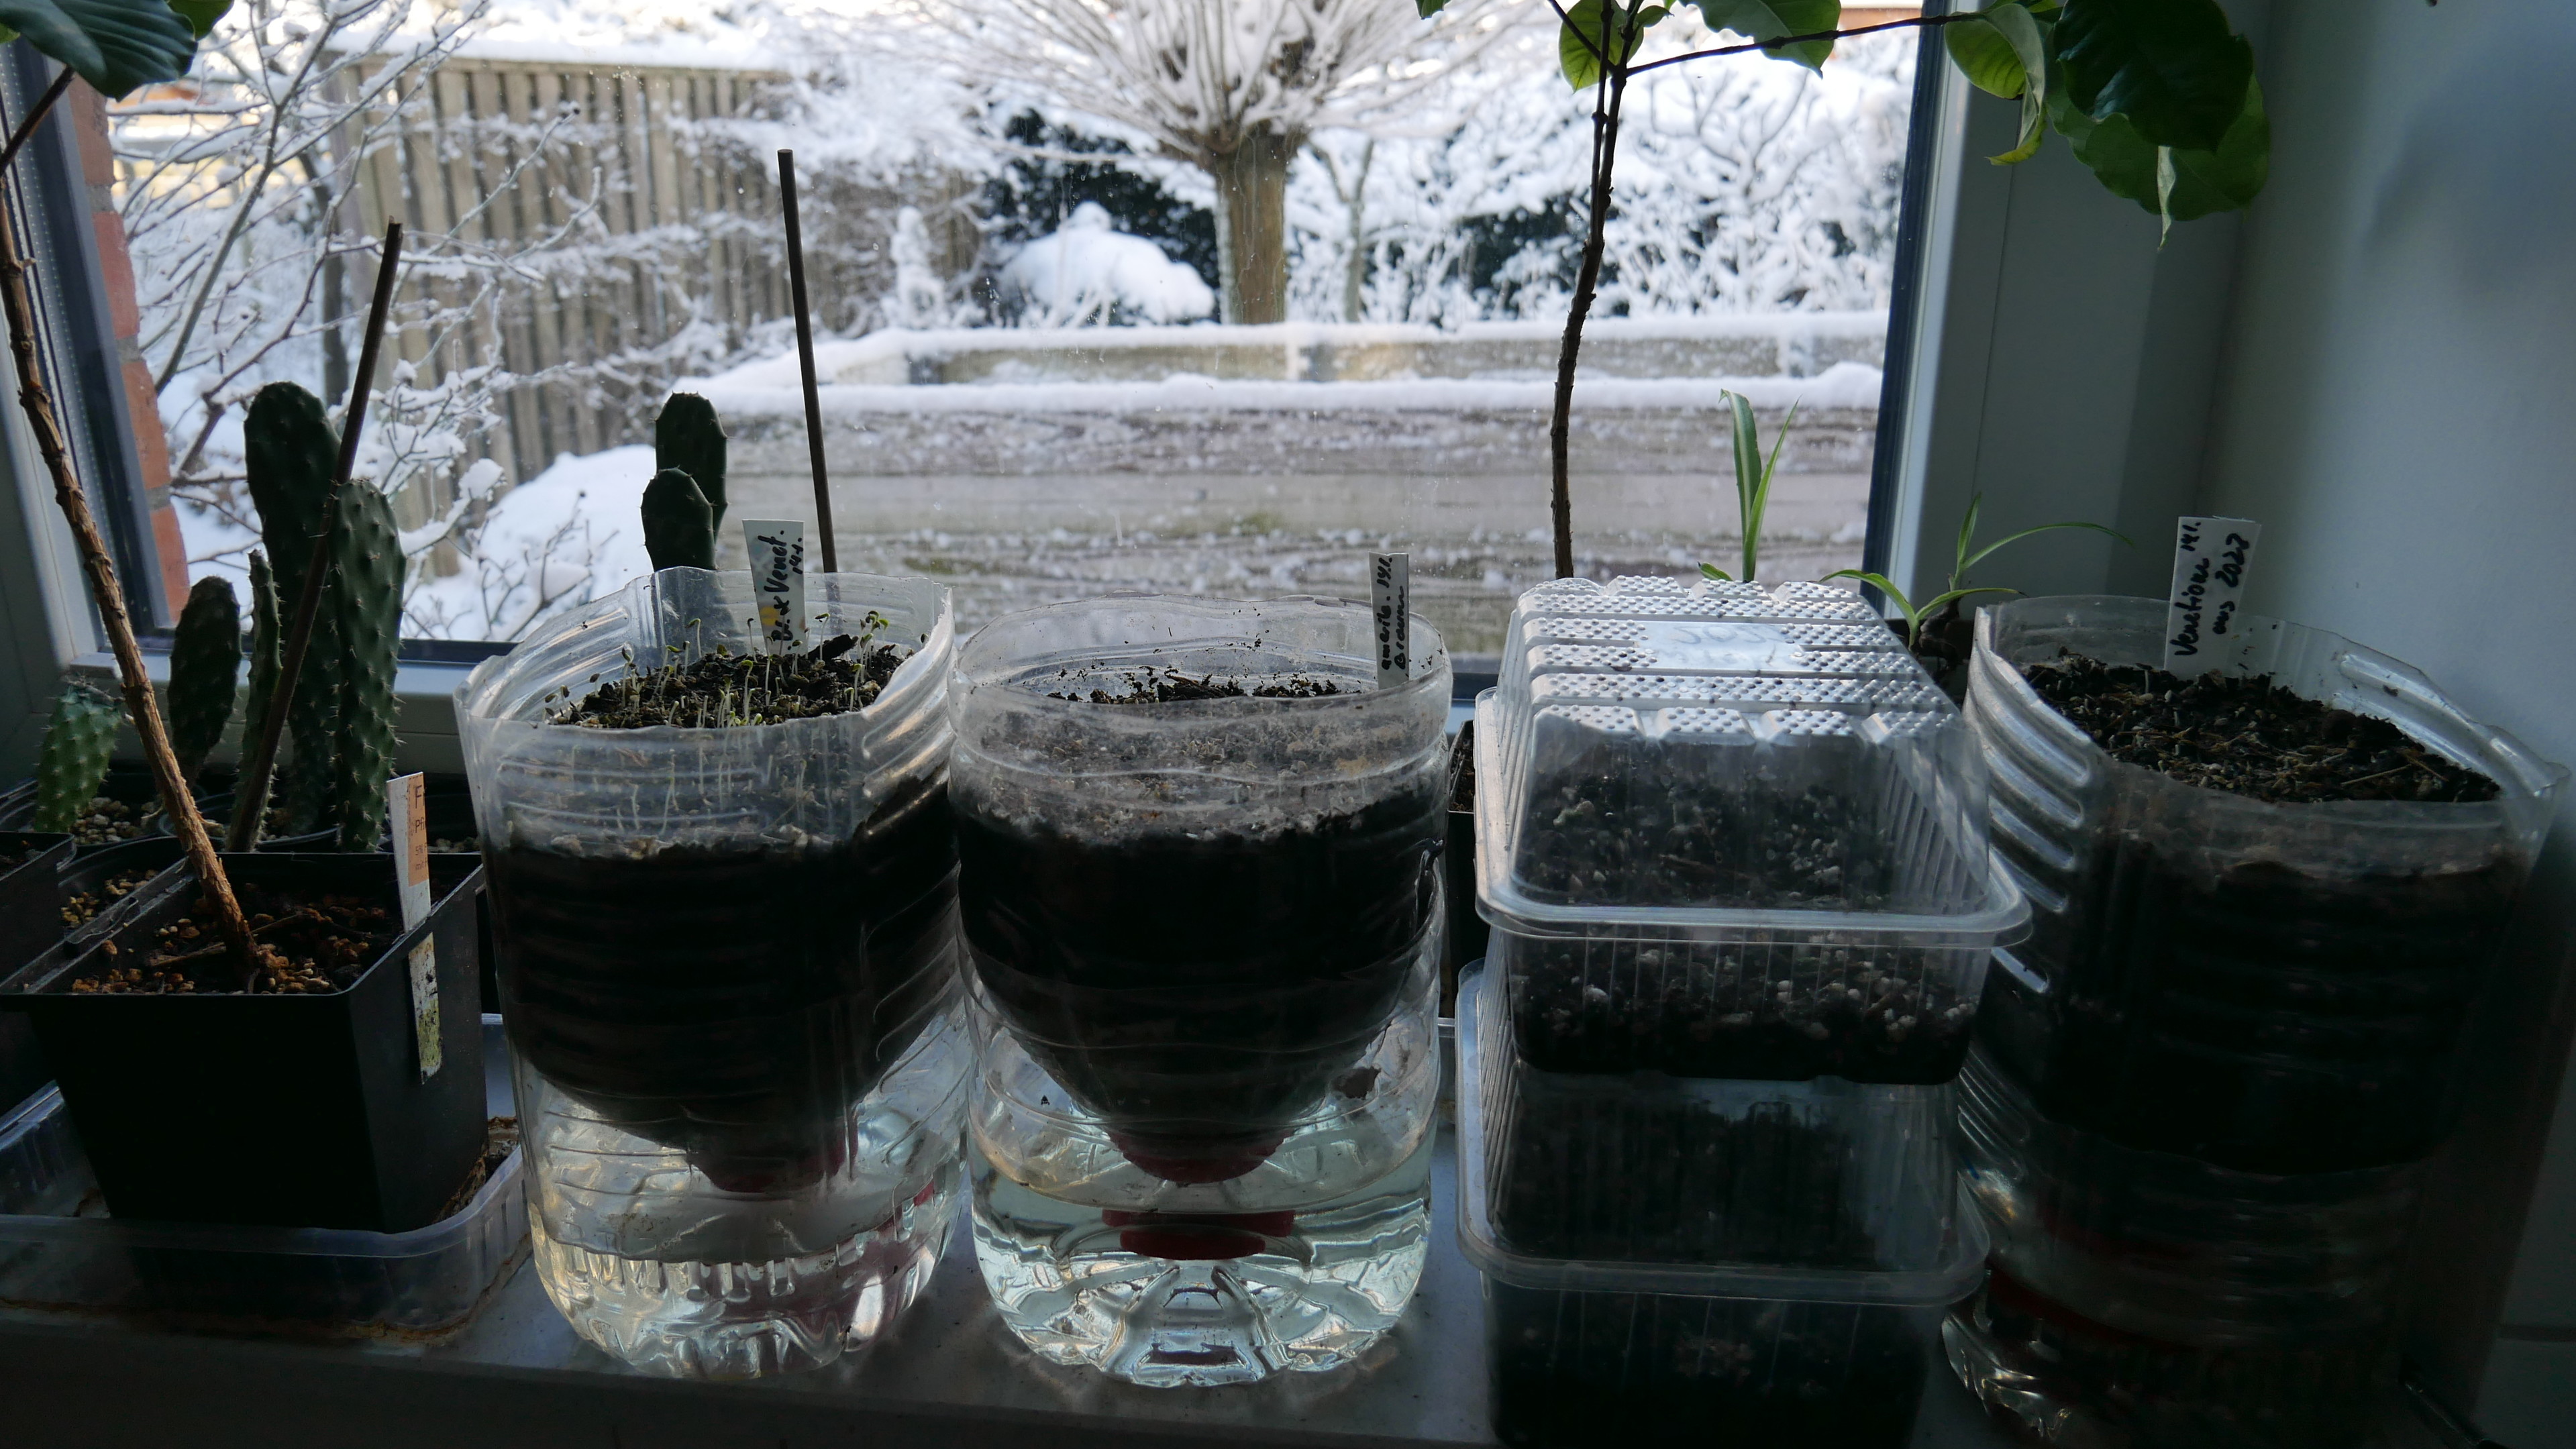 sprouting lettuce on a window sill with garden in snow as a backdrop. The lettuce is in water bottles cut apart and transformed into wicking beds.